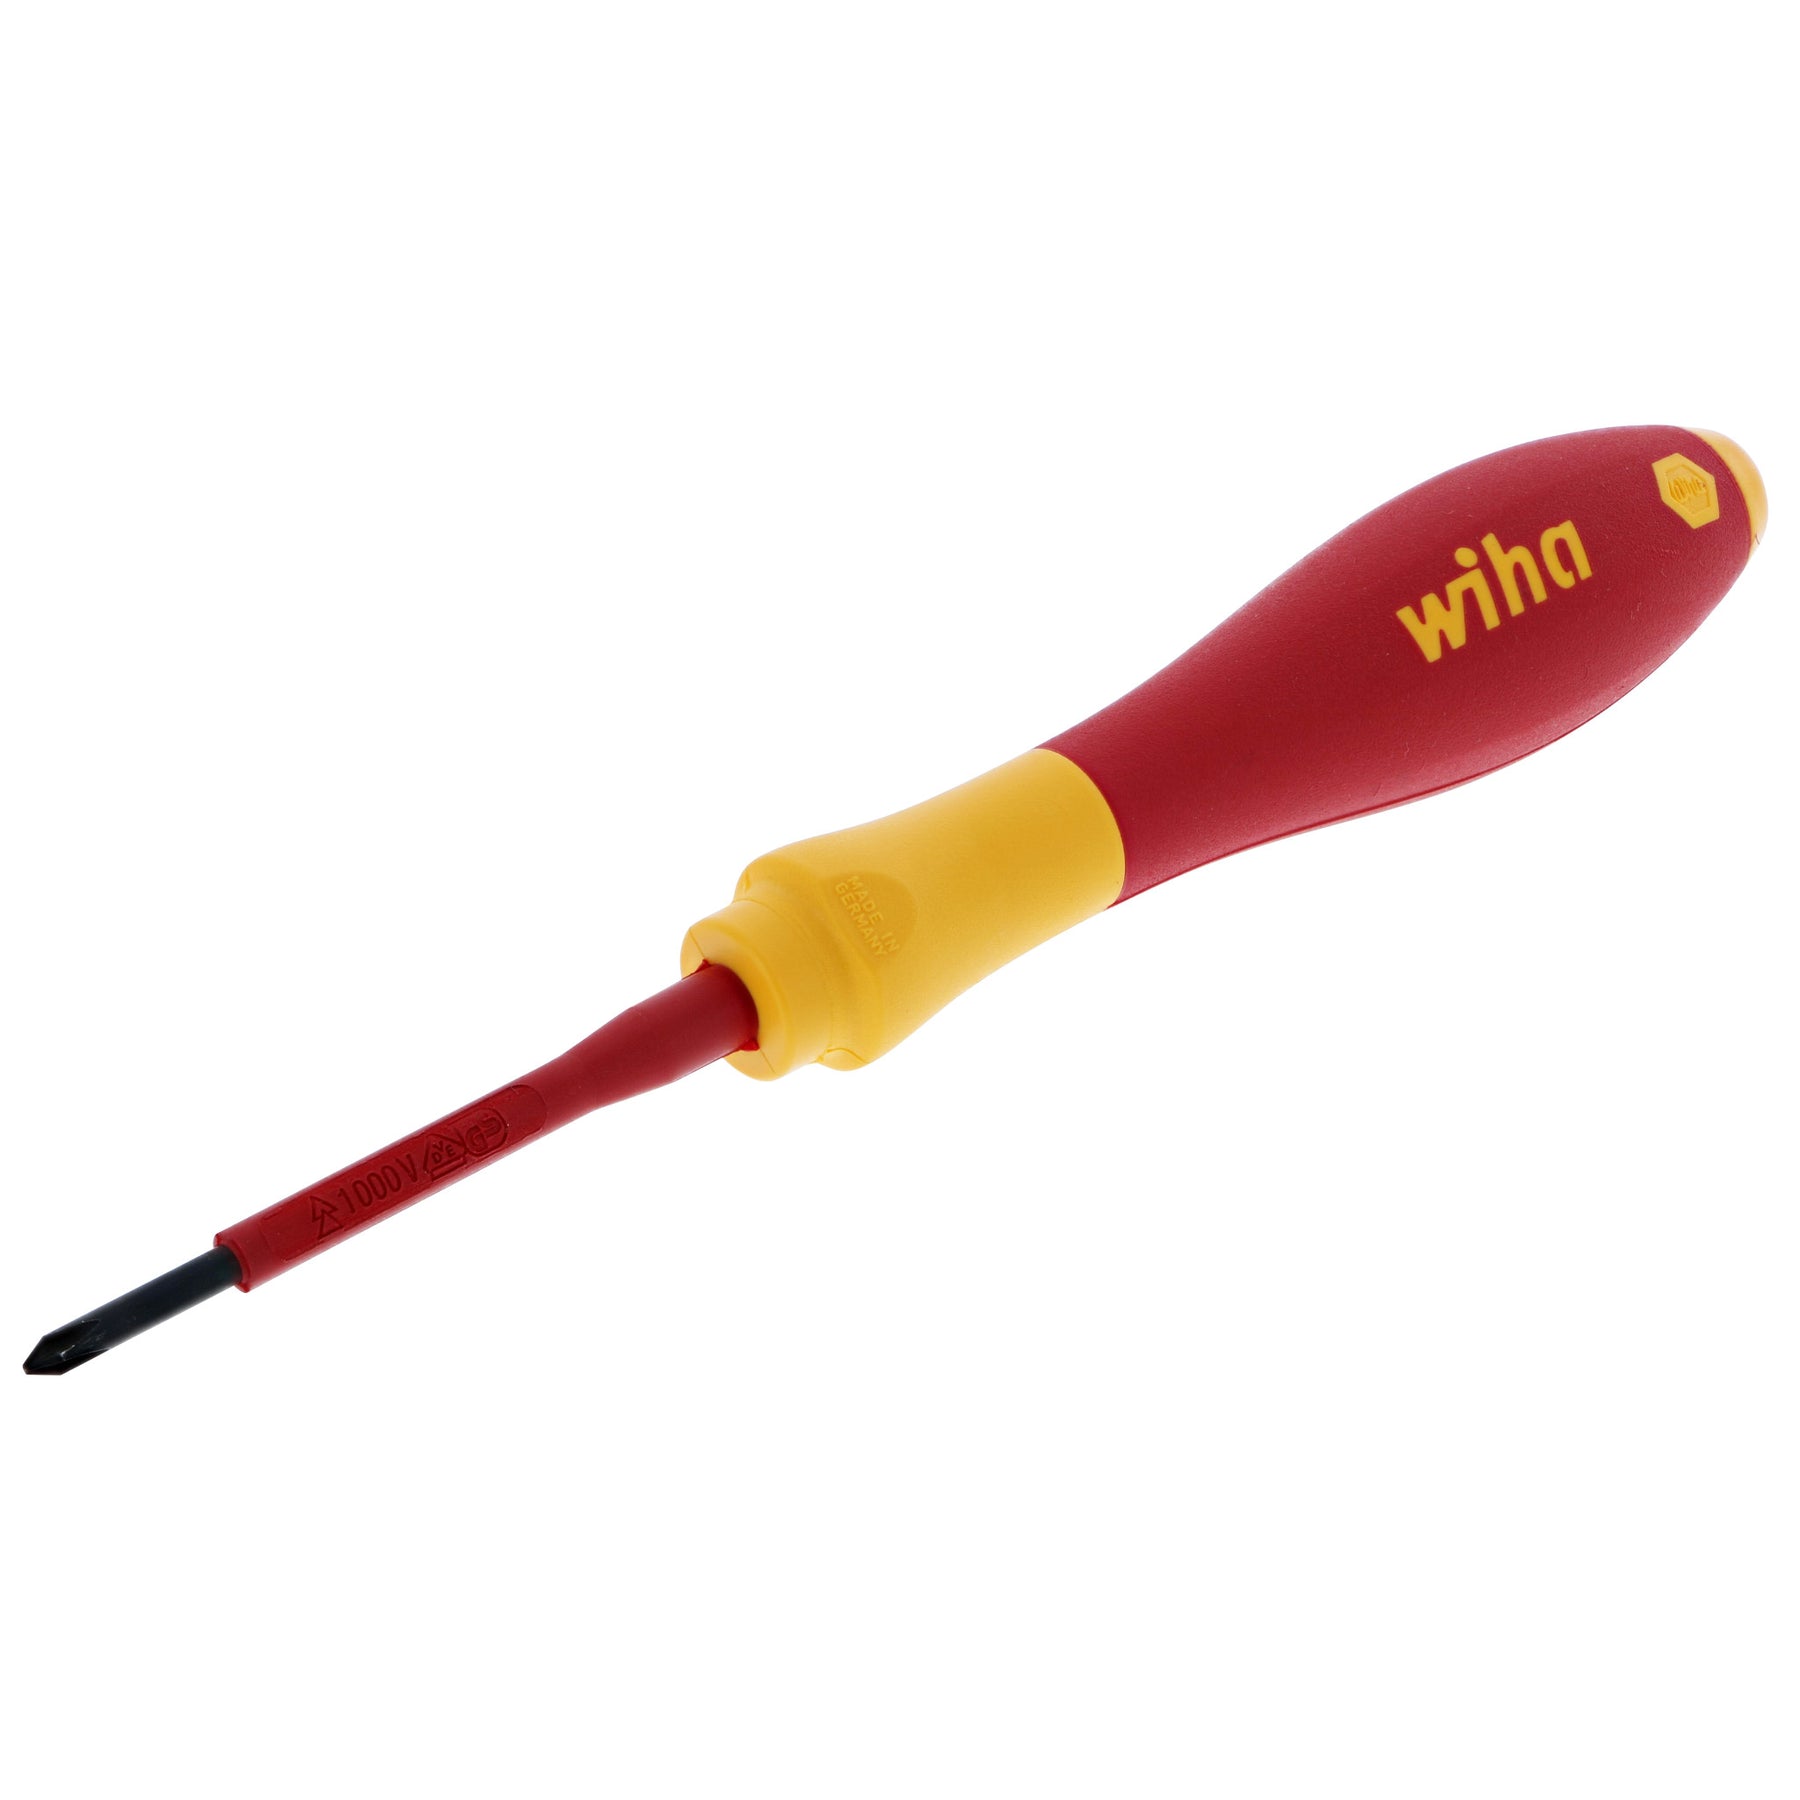 Wiha 32100 Insulated Phillips Screwdriver #0 Made in Germany